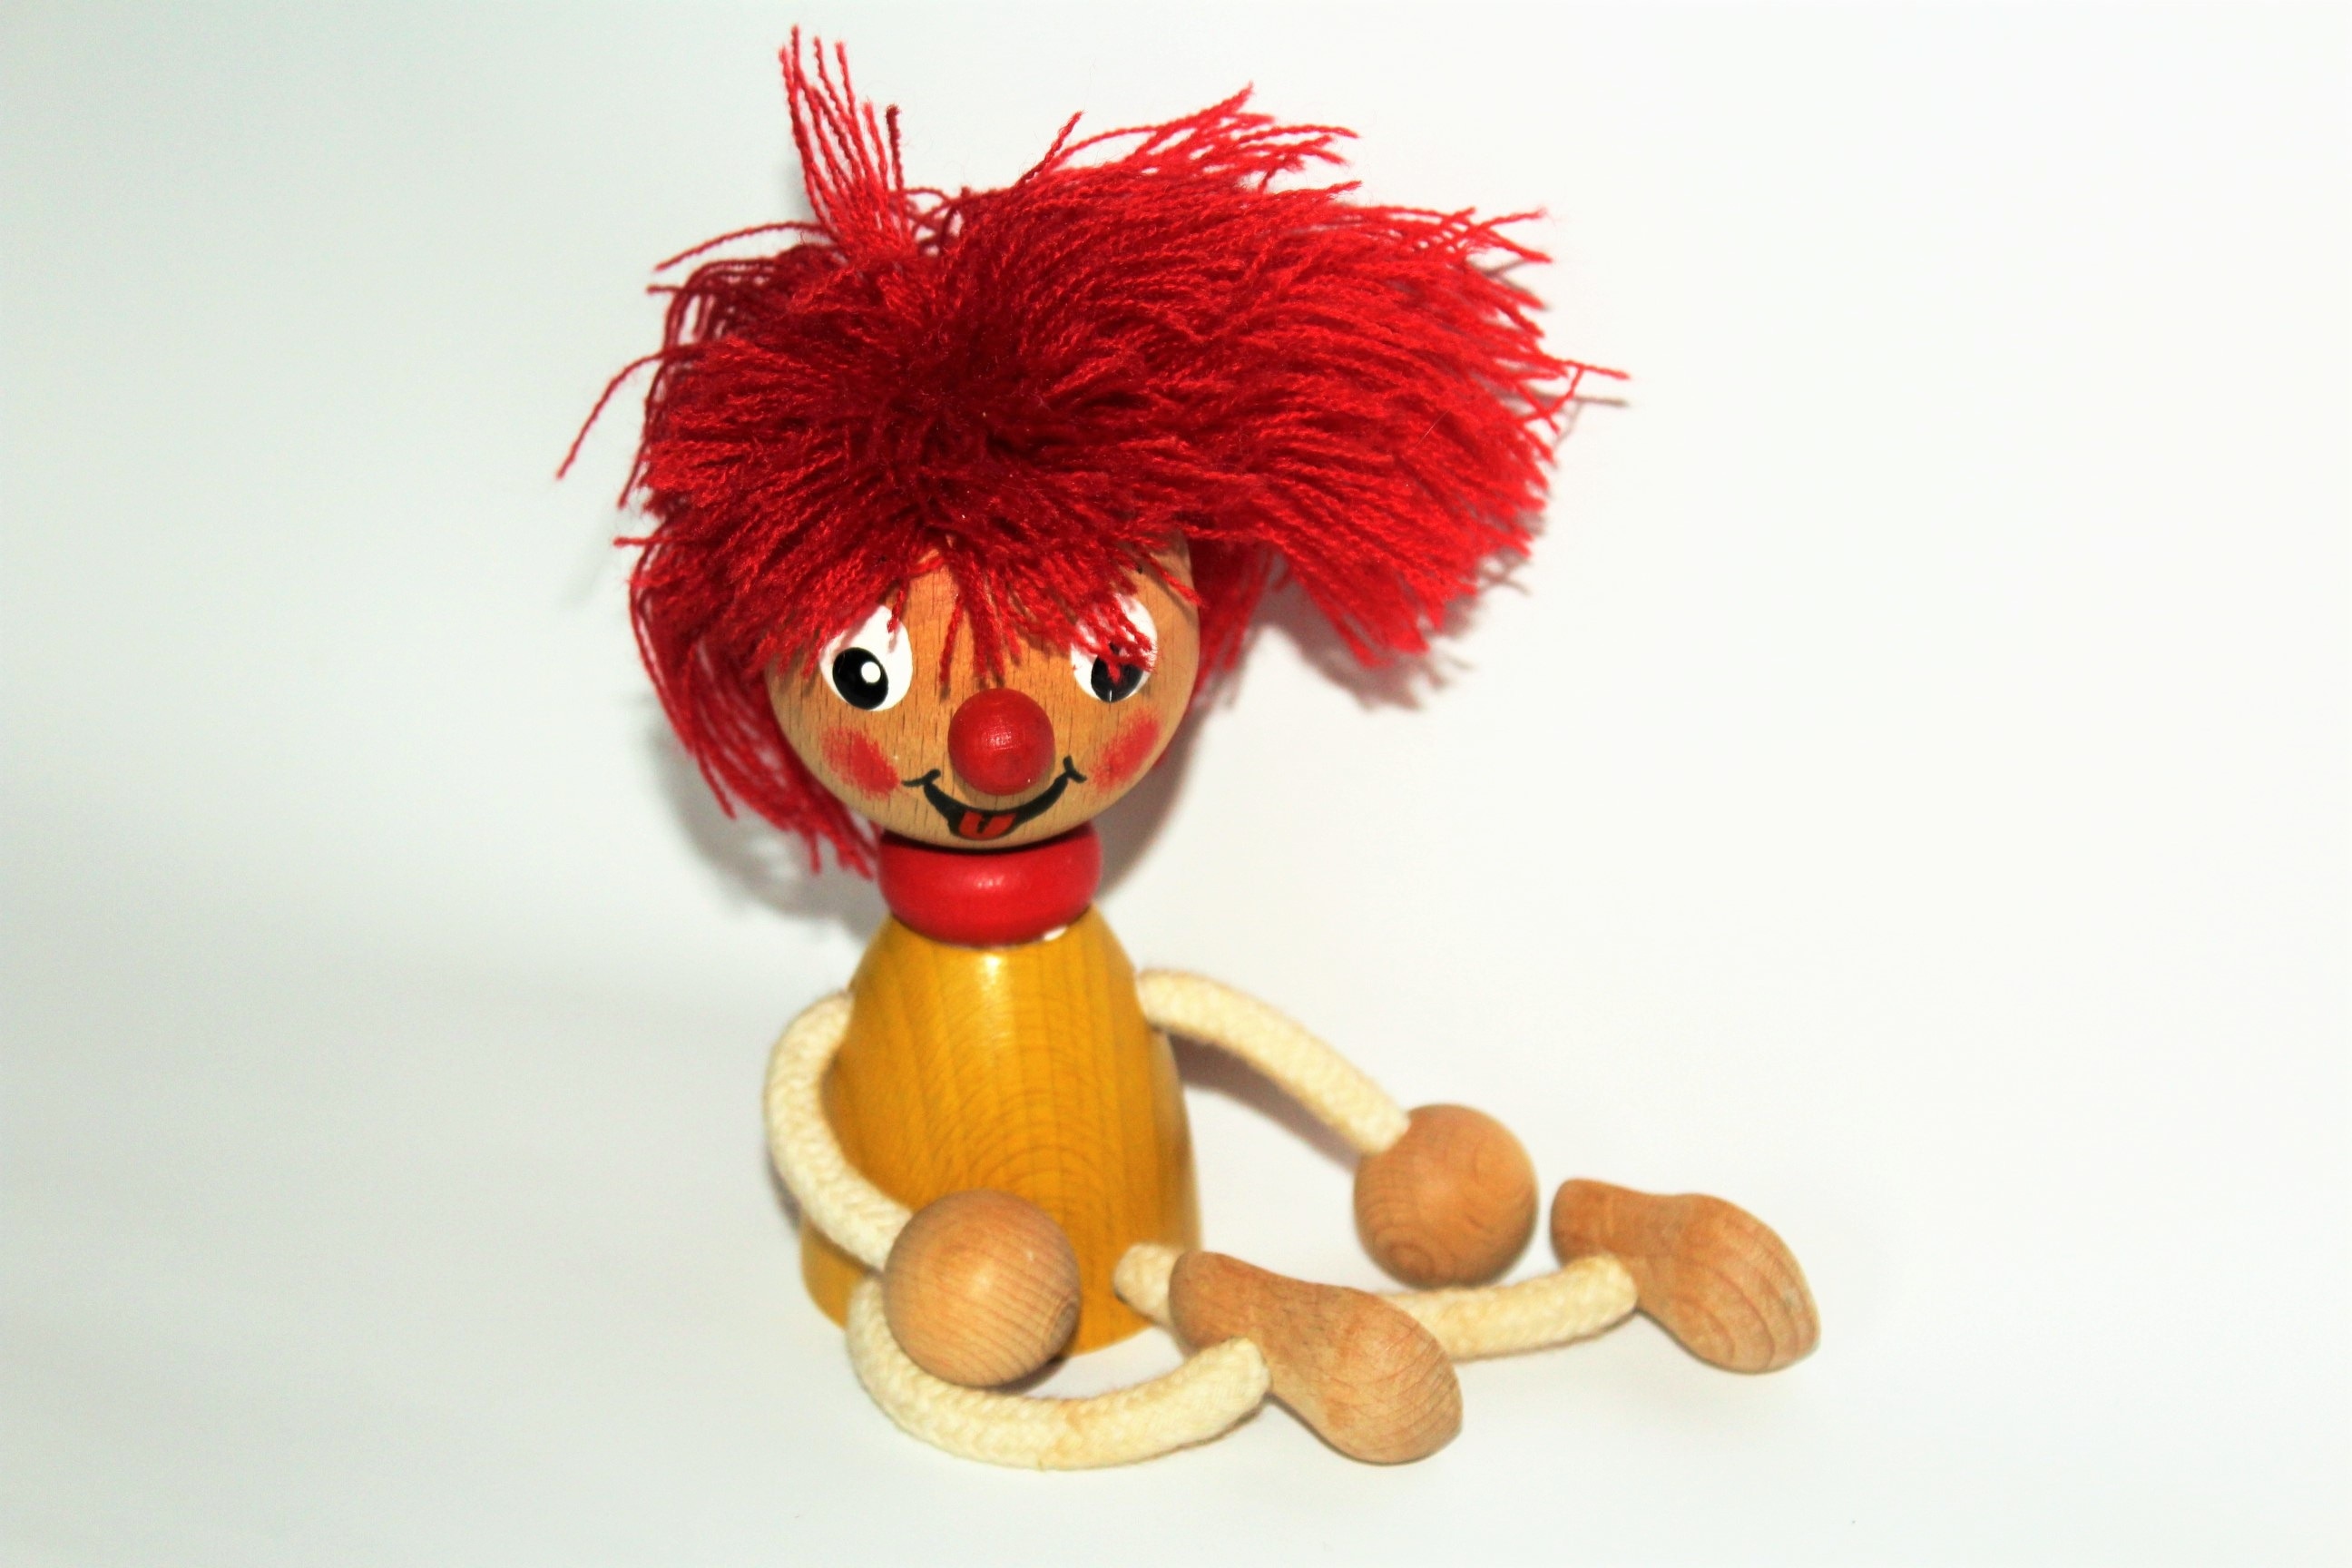 red haired wooden doll